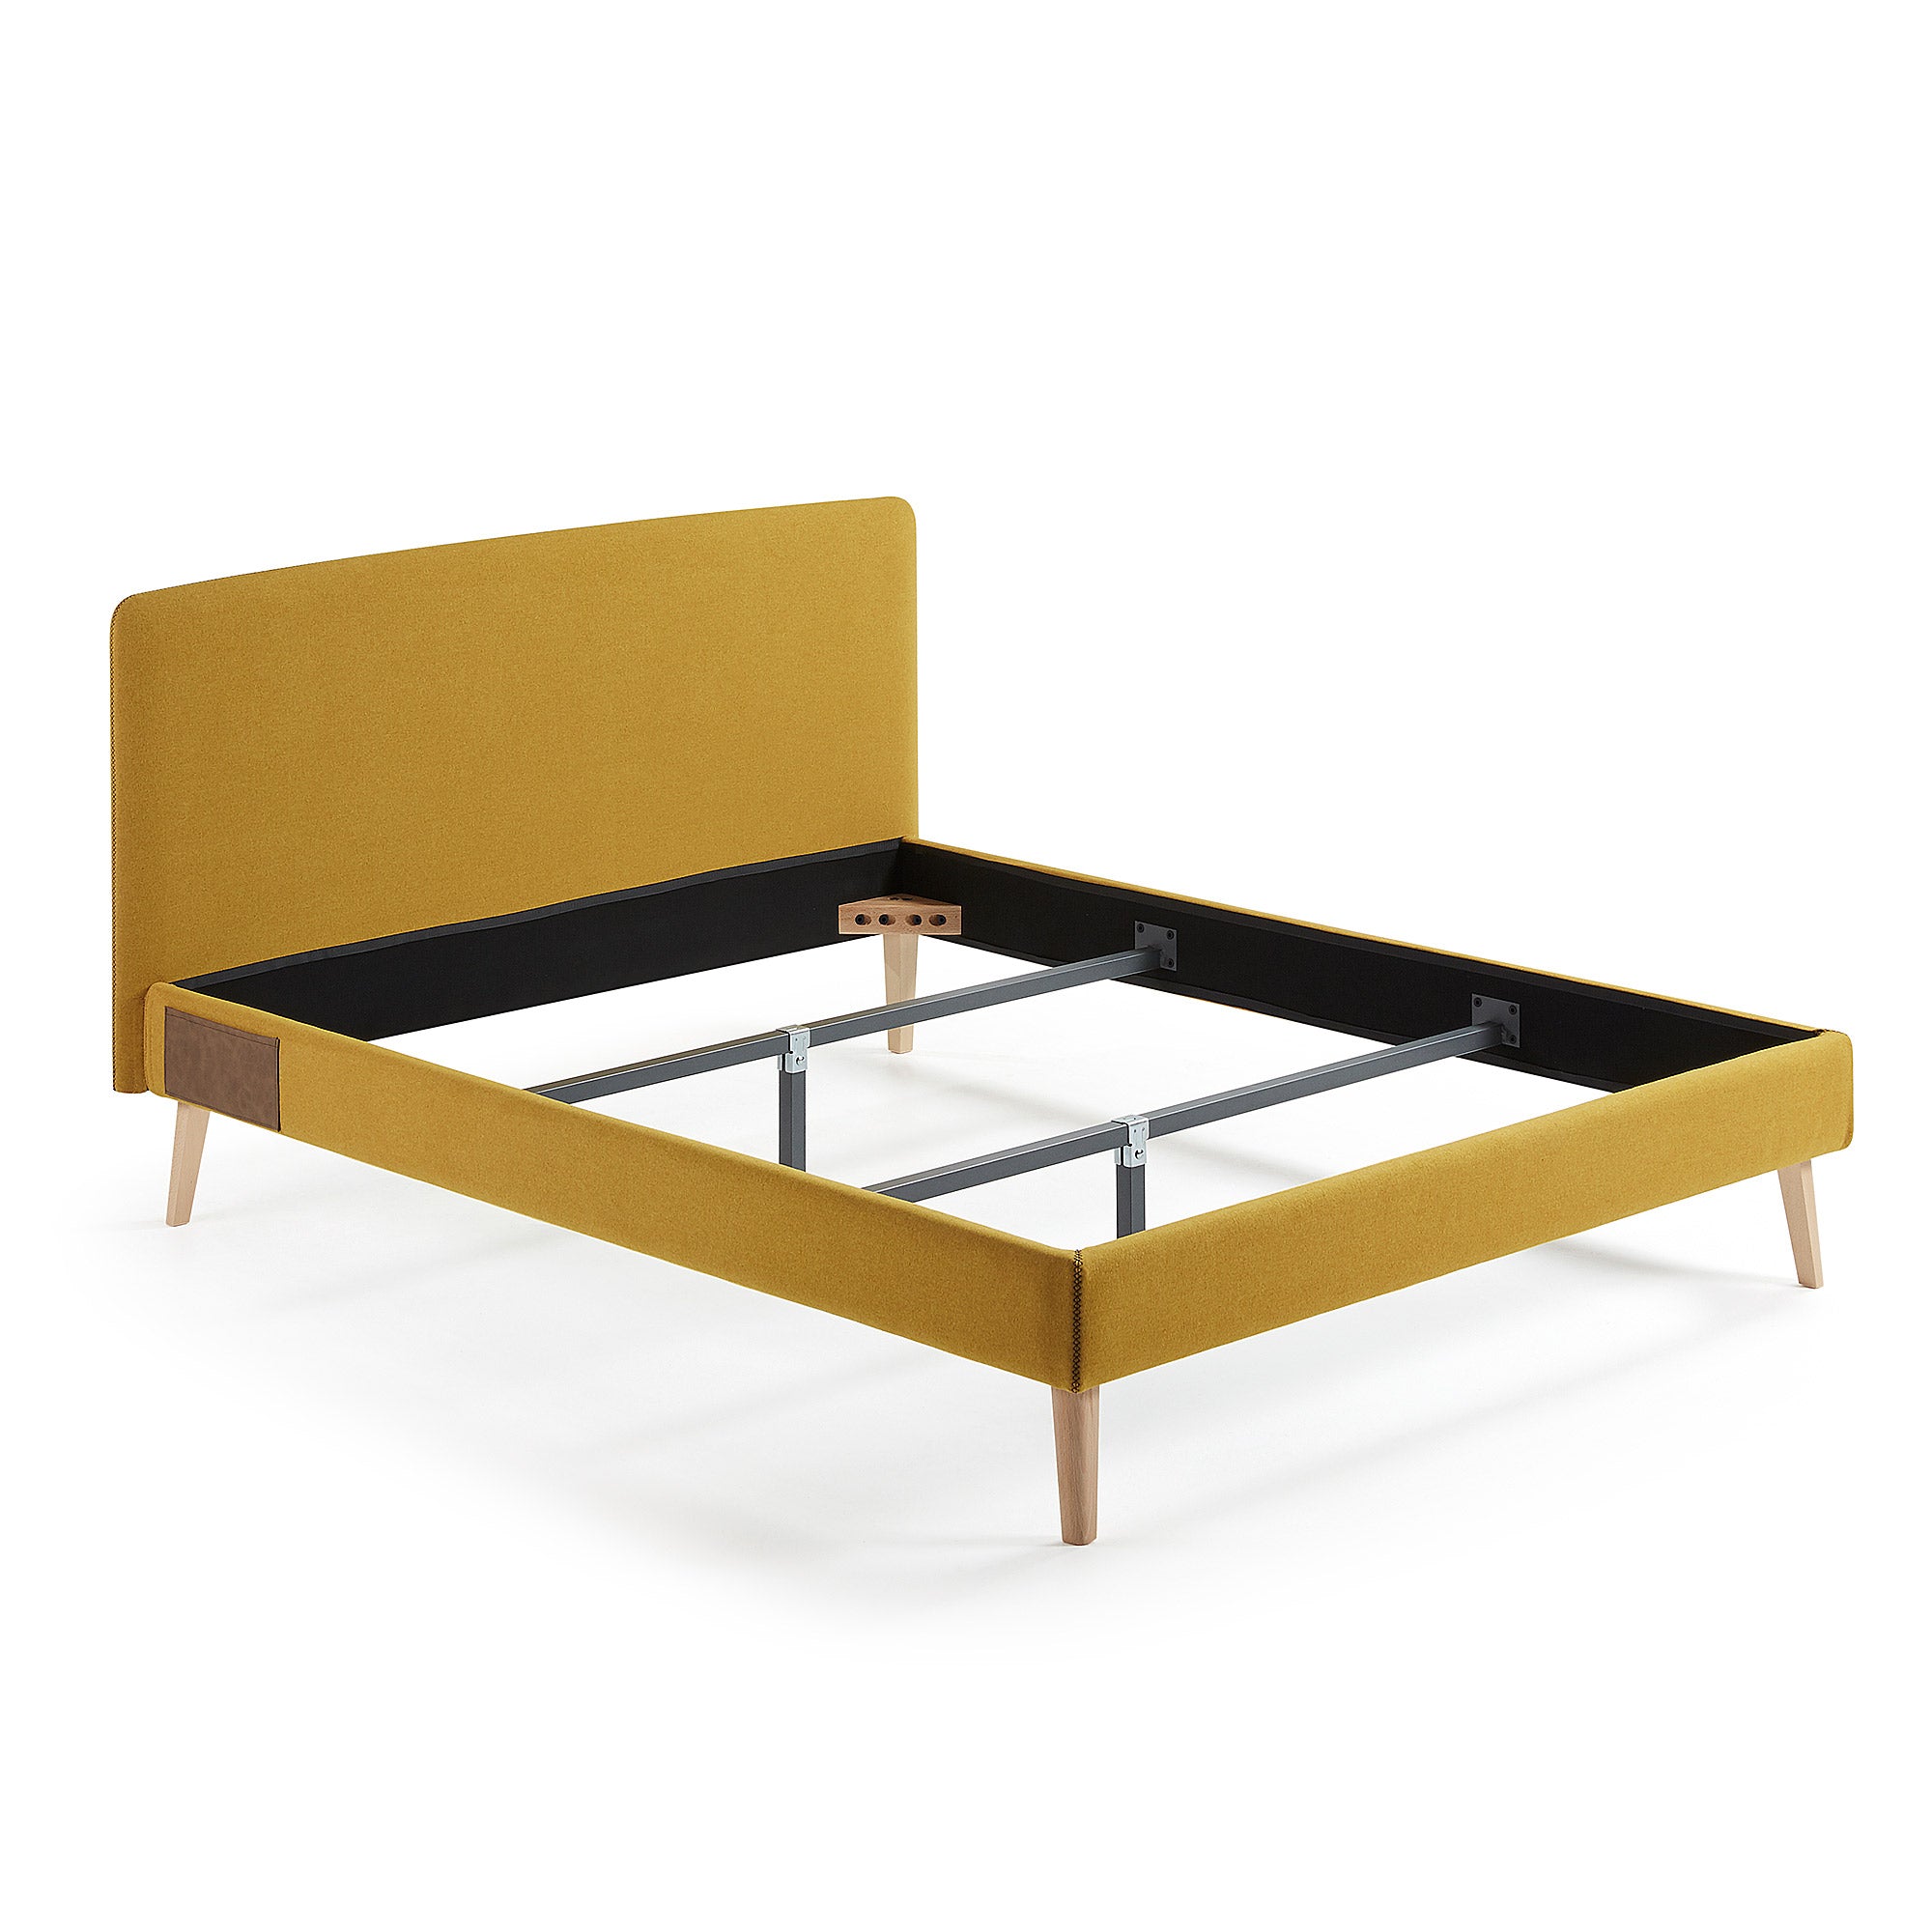 Dyla bed with removable cover in mustard, with solid beech wood legs for a 160 x 200 cm mattress